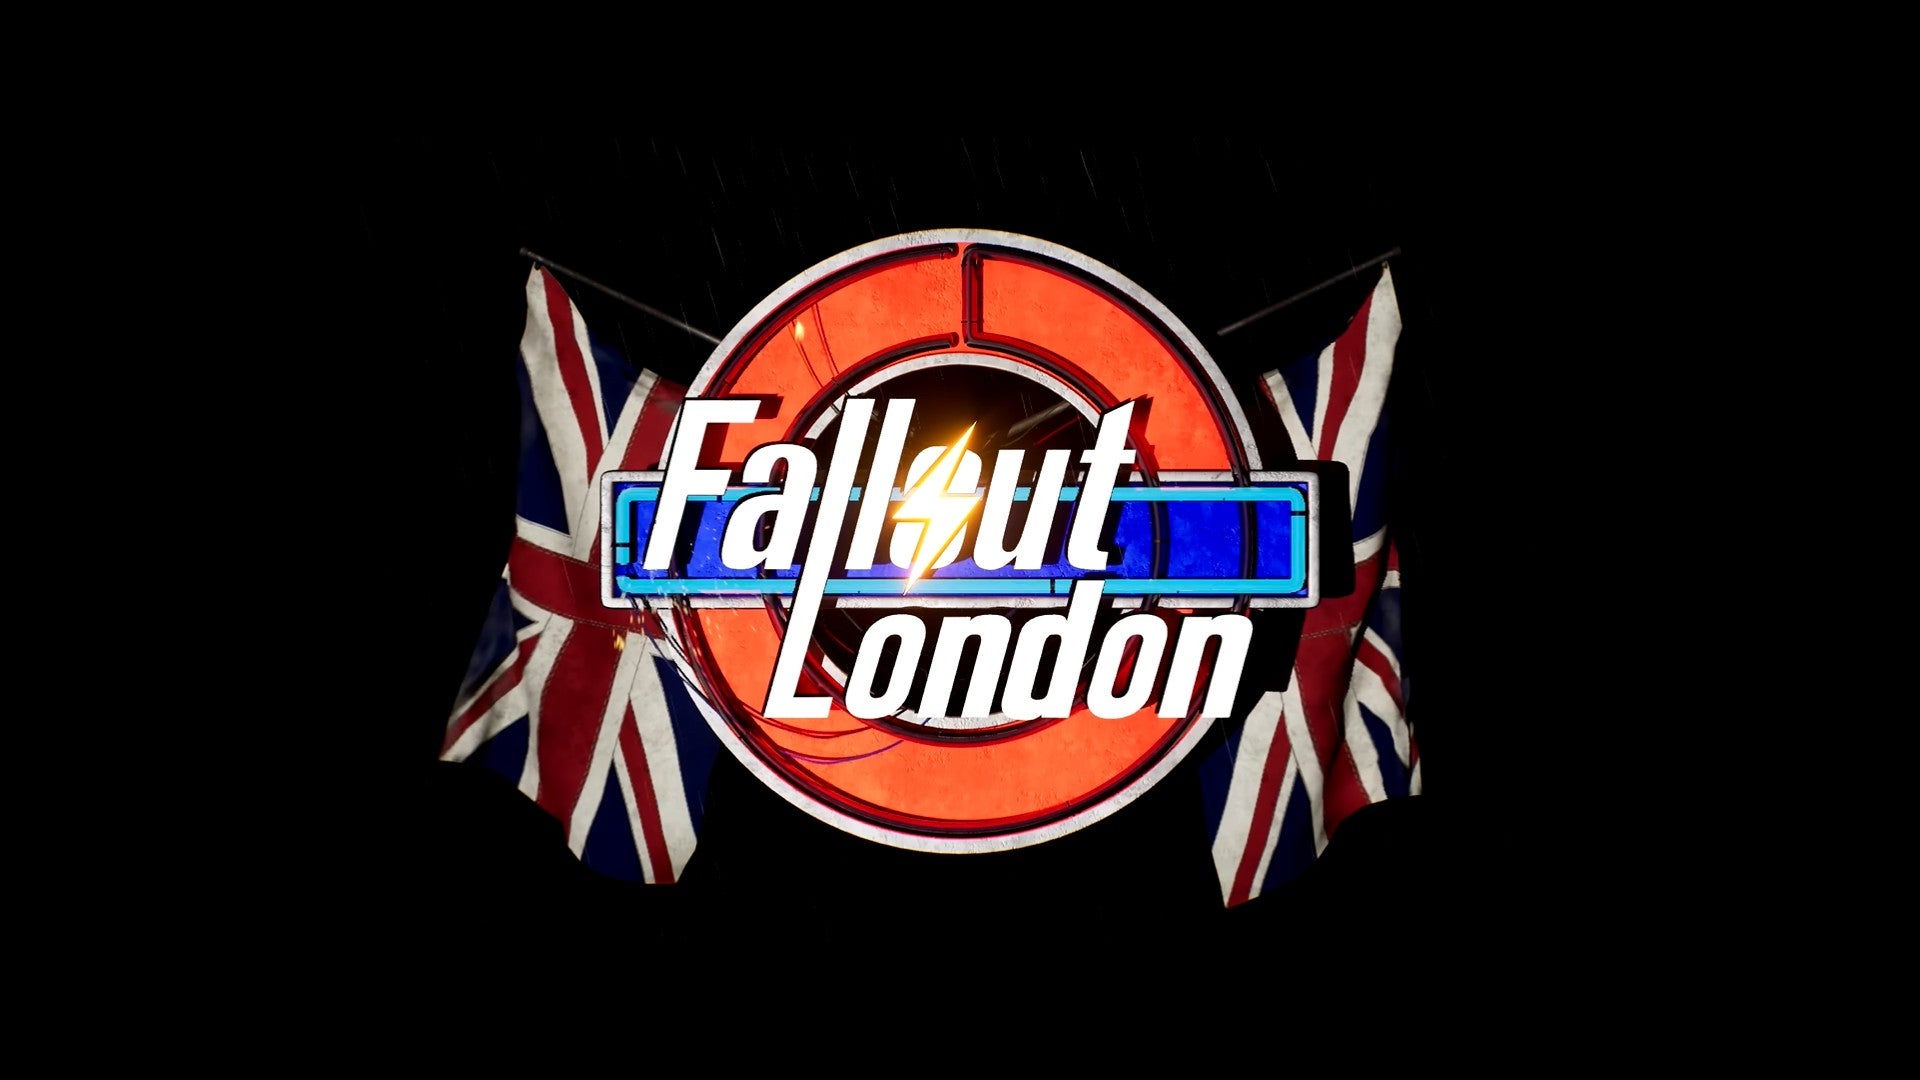 Image for Fallout 4 PC mod Fallout: London gets new trailer, coming 2023